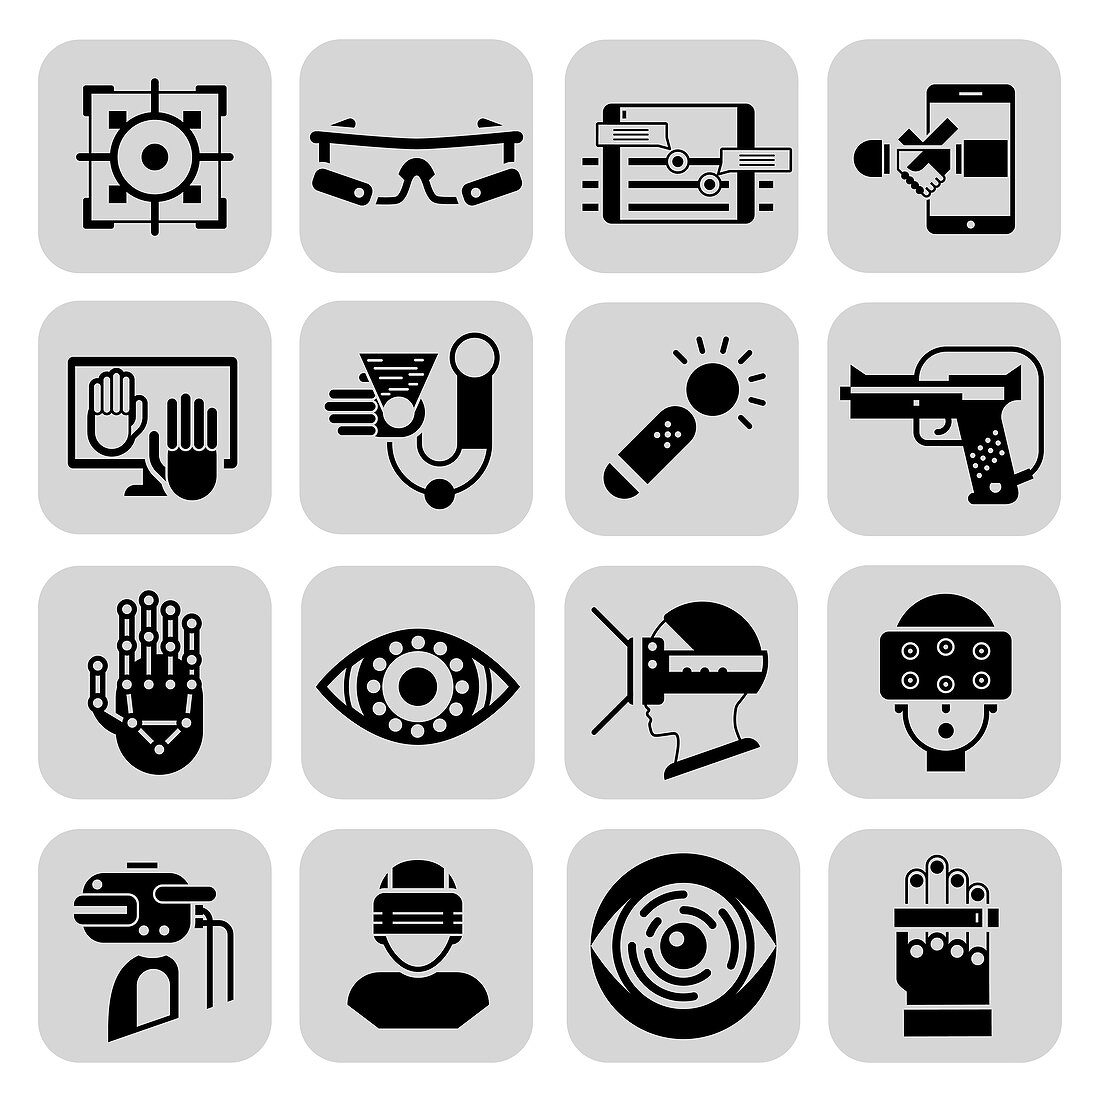 Virtual and augmented reality icons, illustration